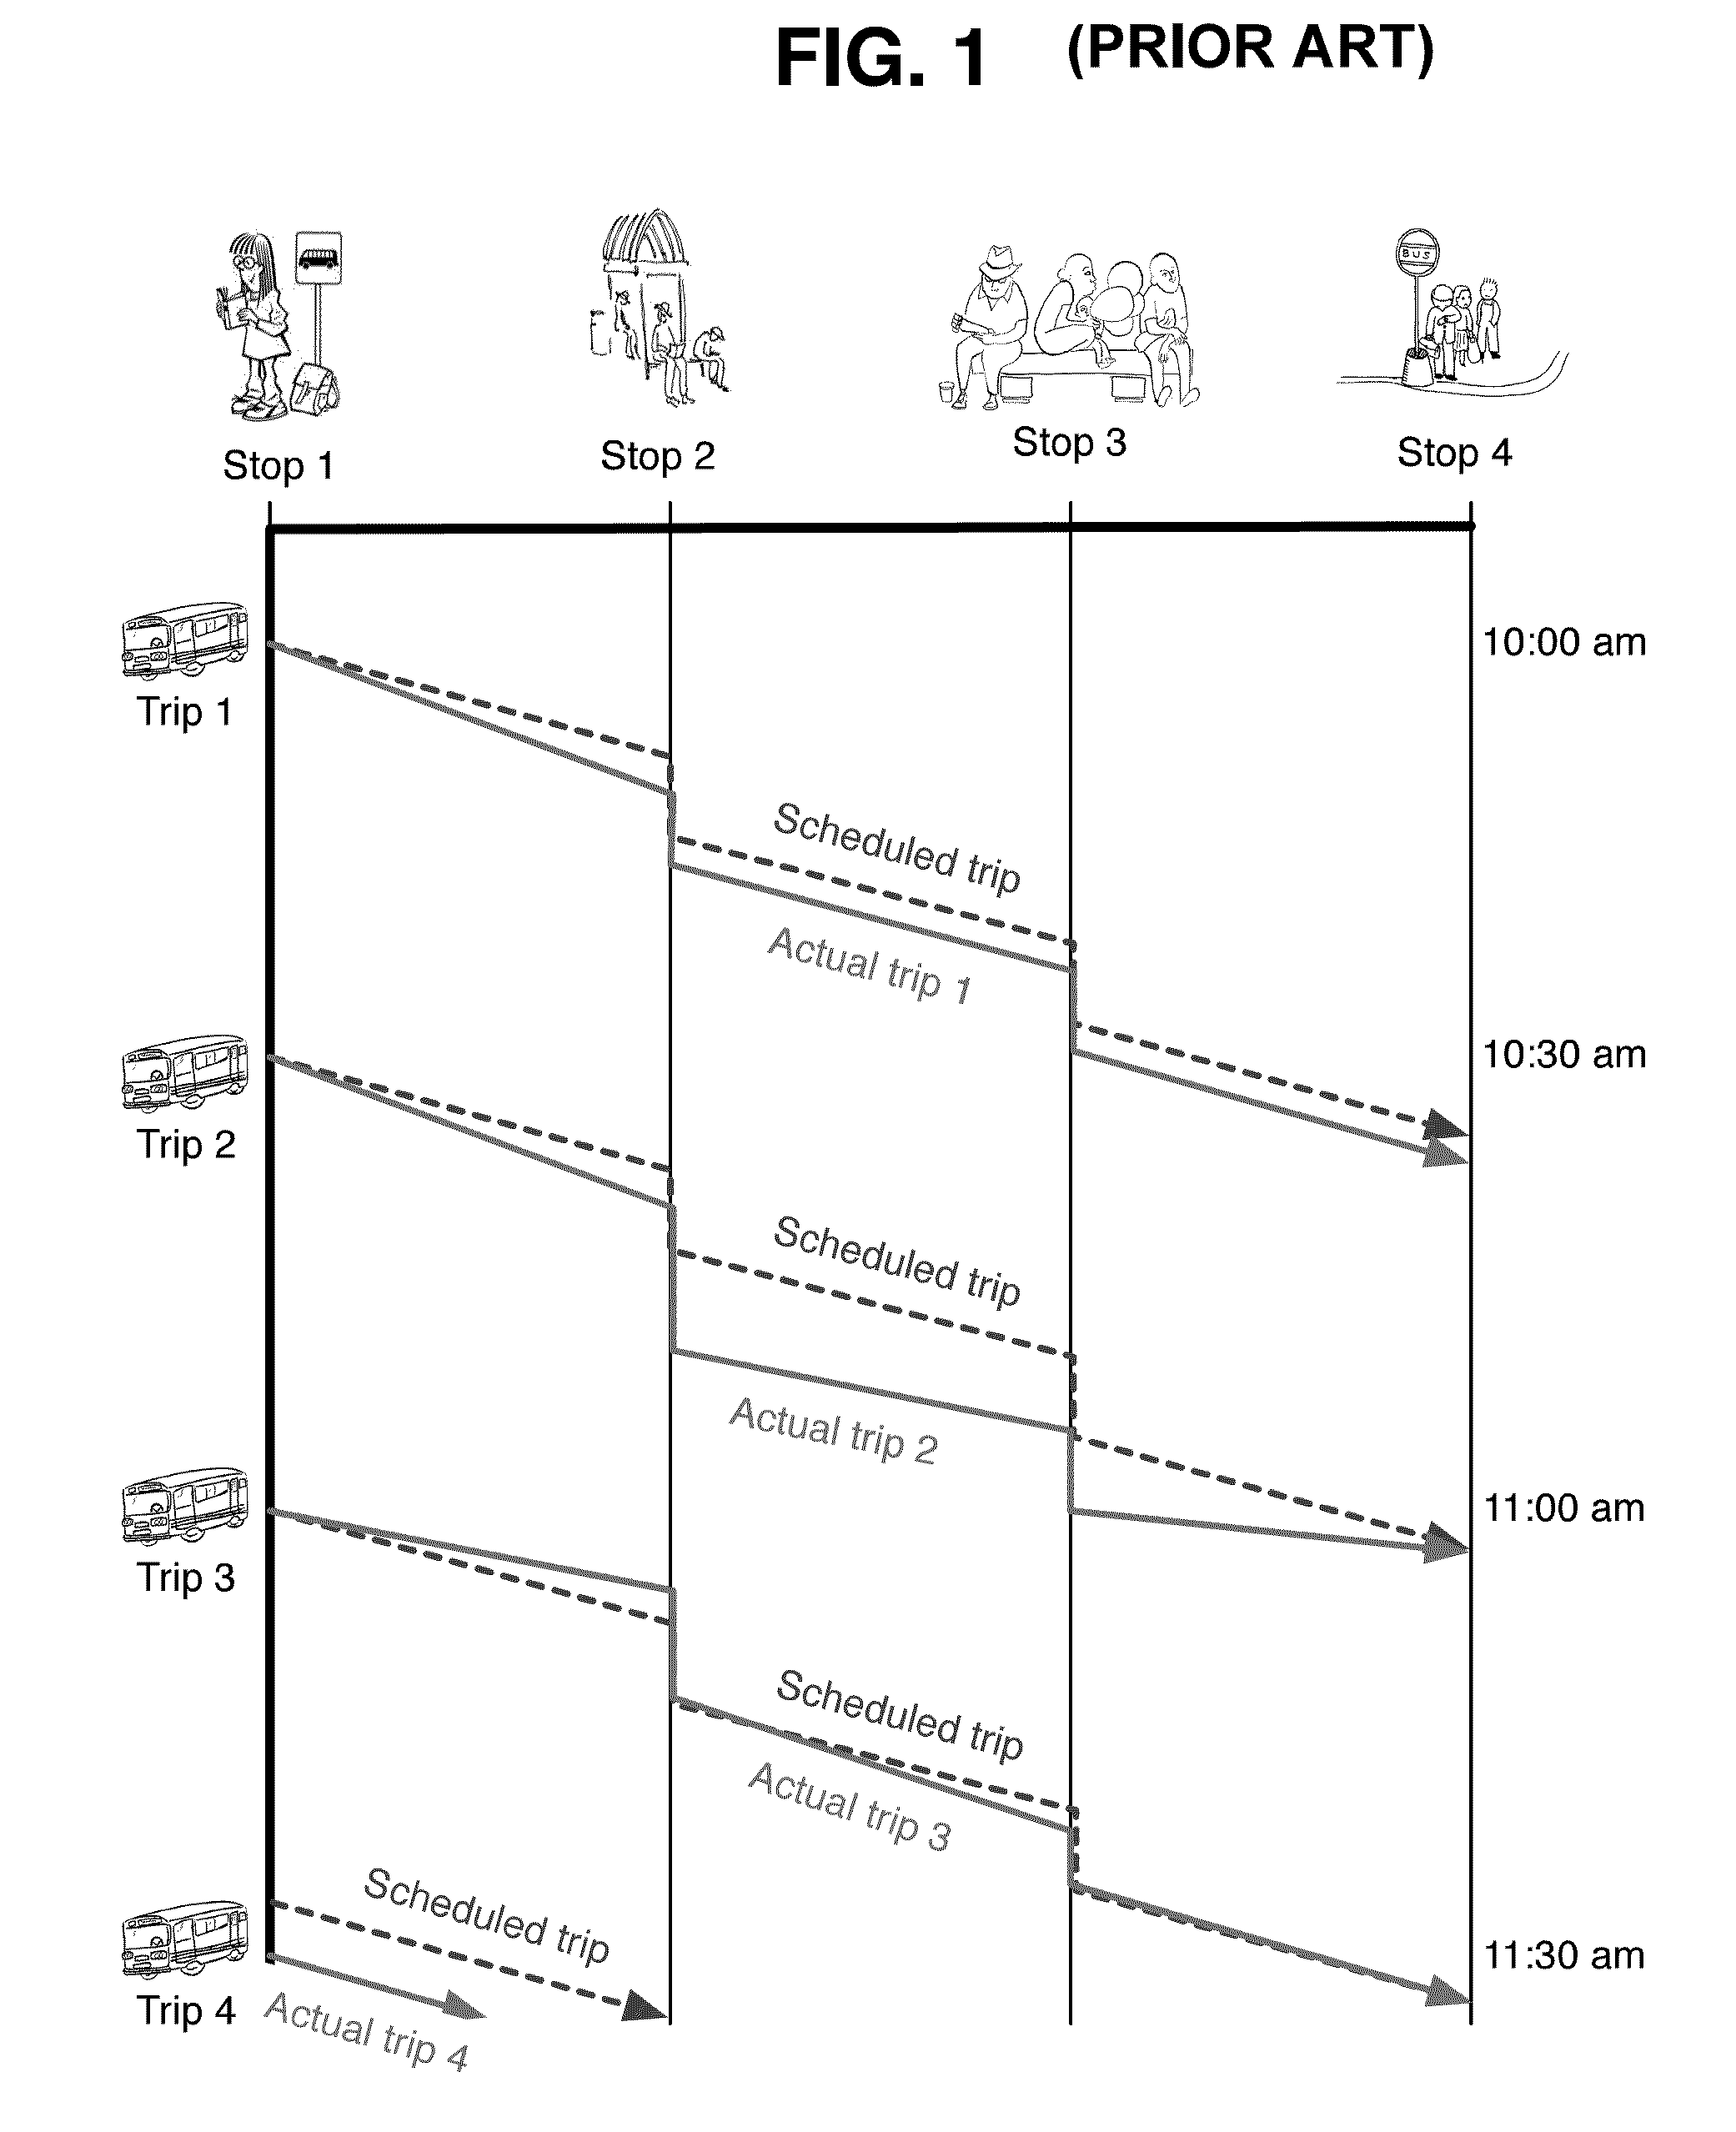 System and Methods for Distributed Tracking of Public Transit Vehicles